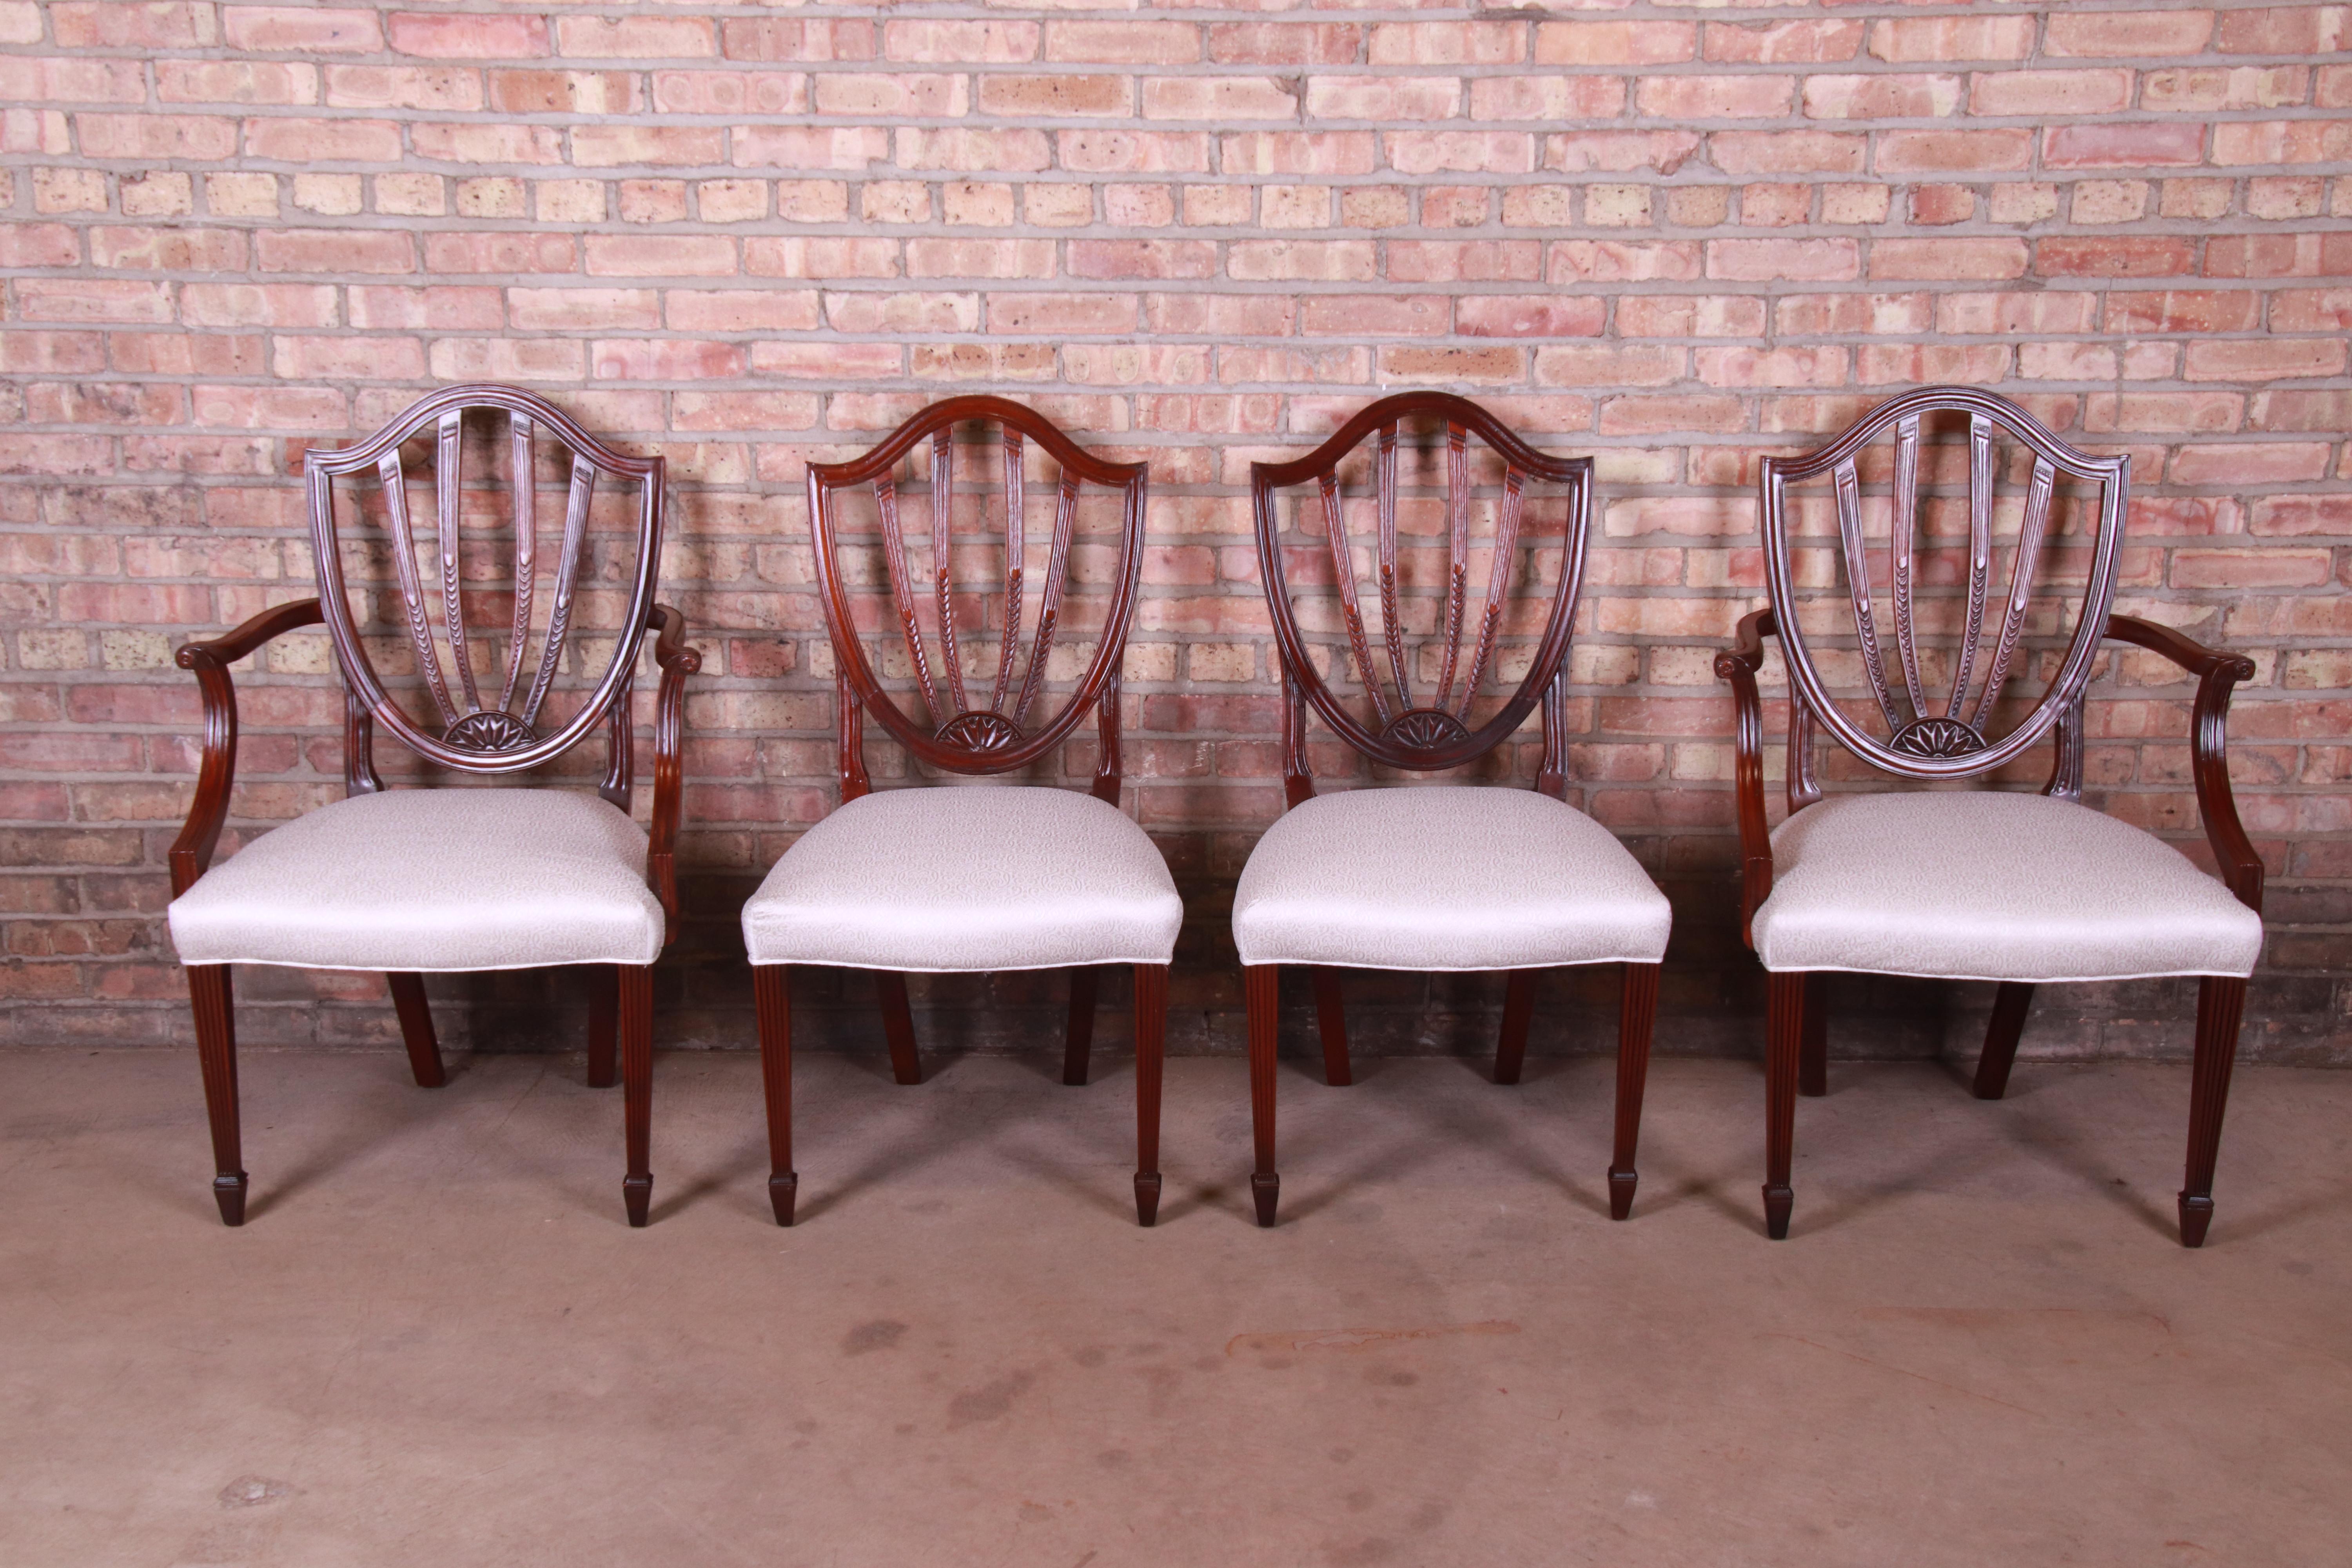 An exceptional set of four Federal or Sheraton style shield-back dining chairs

By Baker Furniture 

USA, circa 1980s

Solid carved mahogany frames, with ivory damask upholstery.

Measures:
Armchairs - 25.63